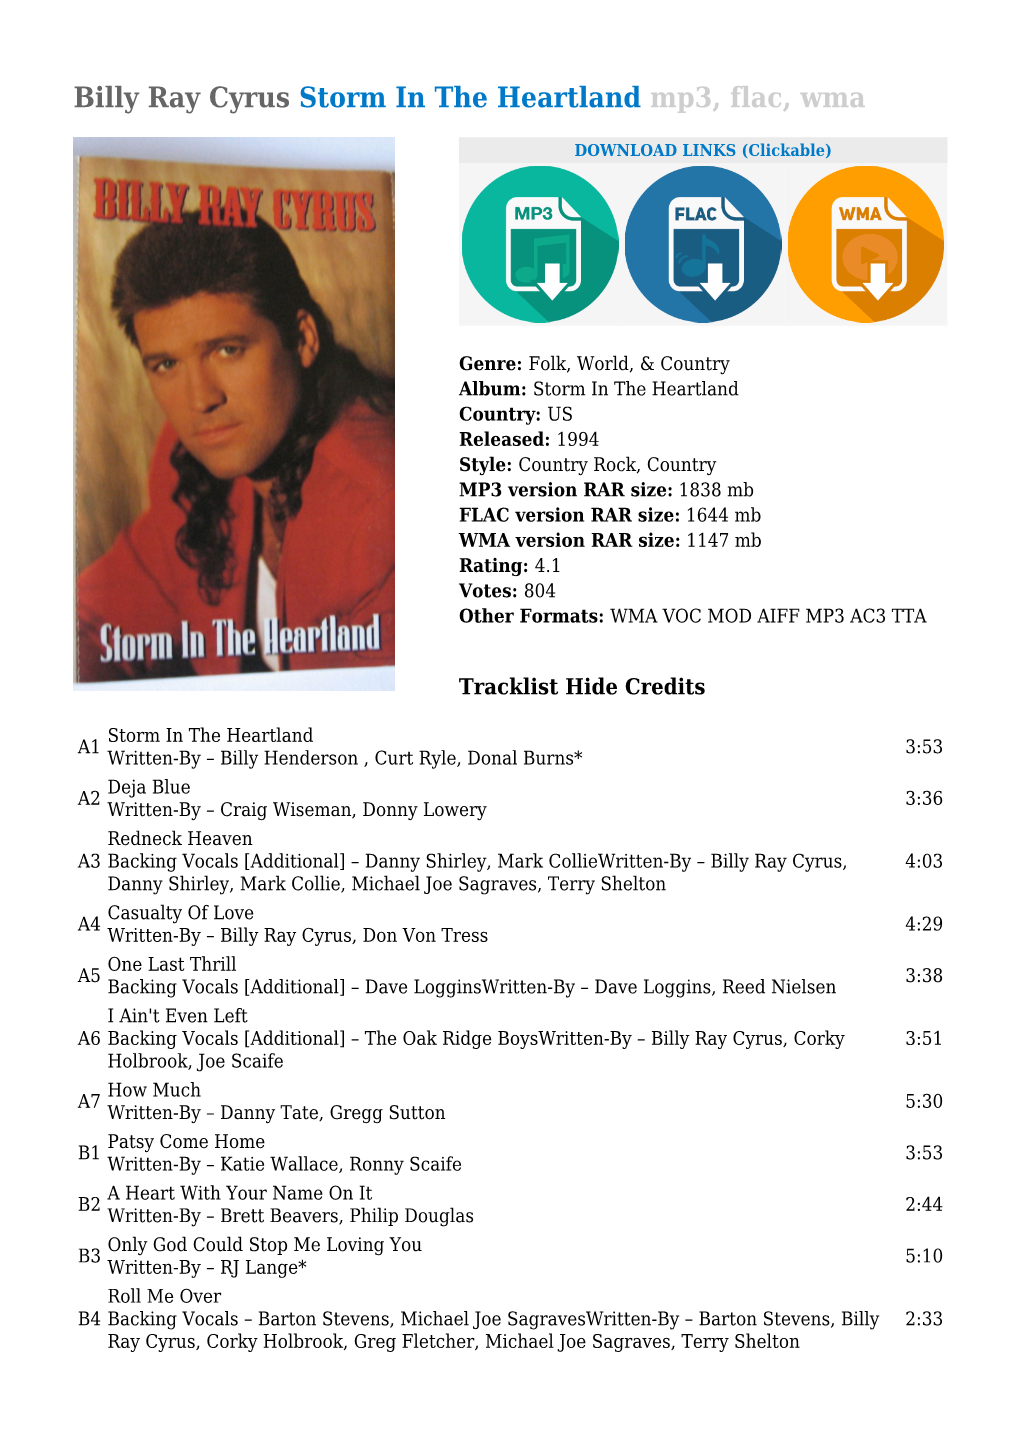 Billy Ray Cyrus Storm in the Heartland Mp3, Flac, Wma